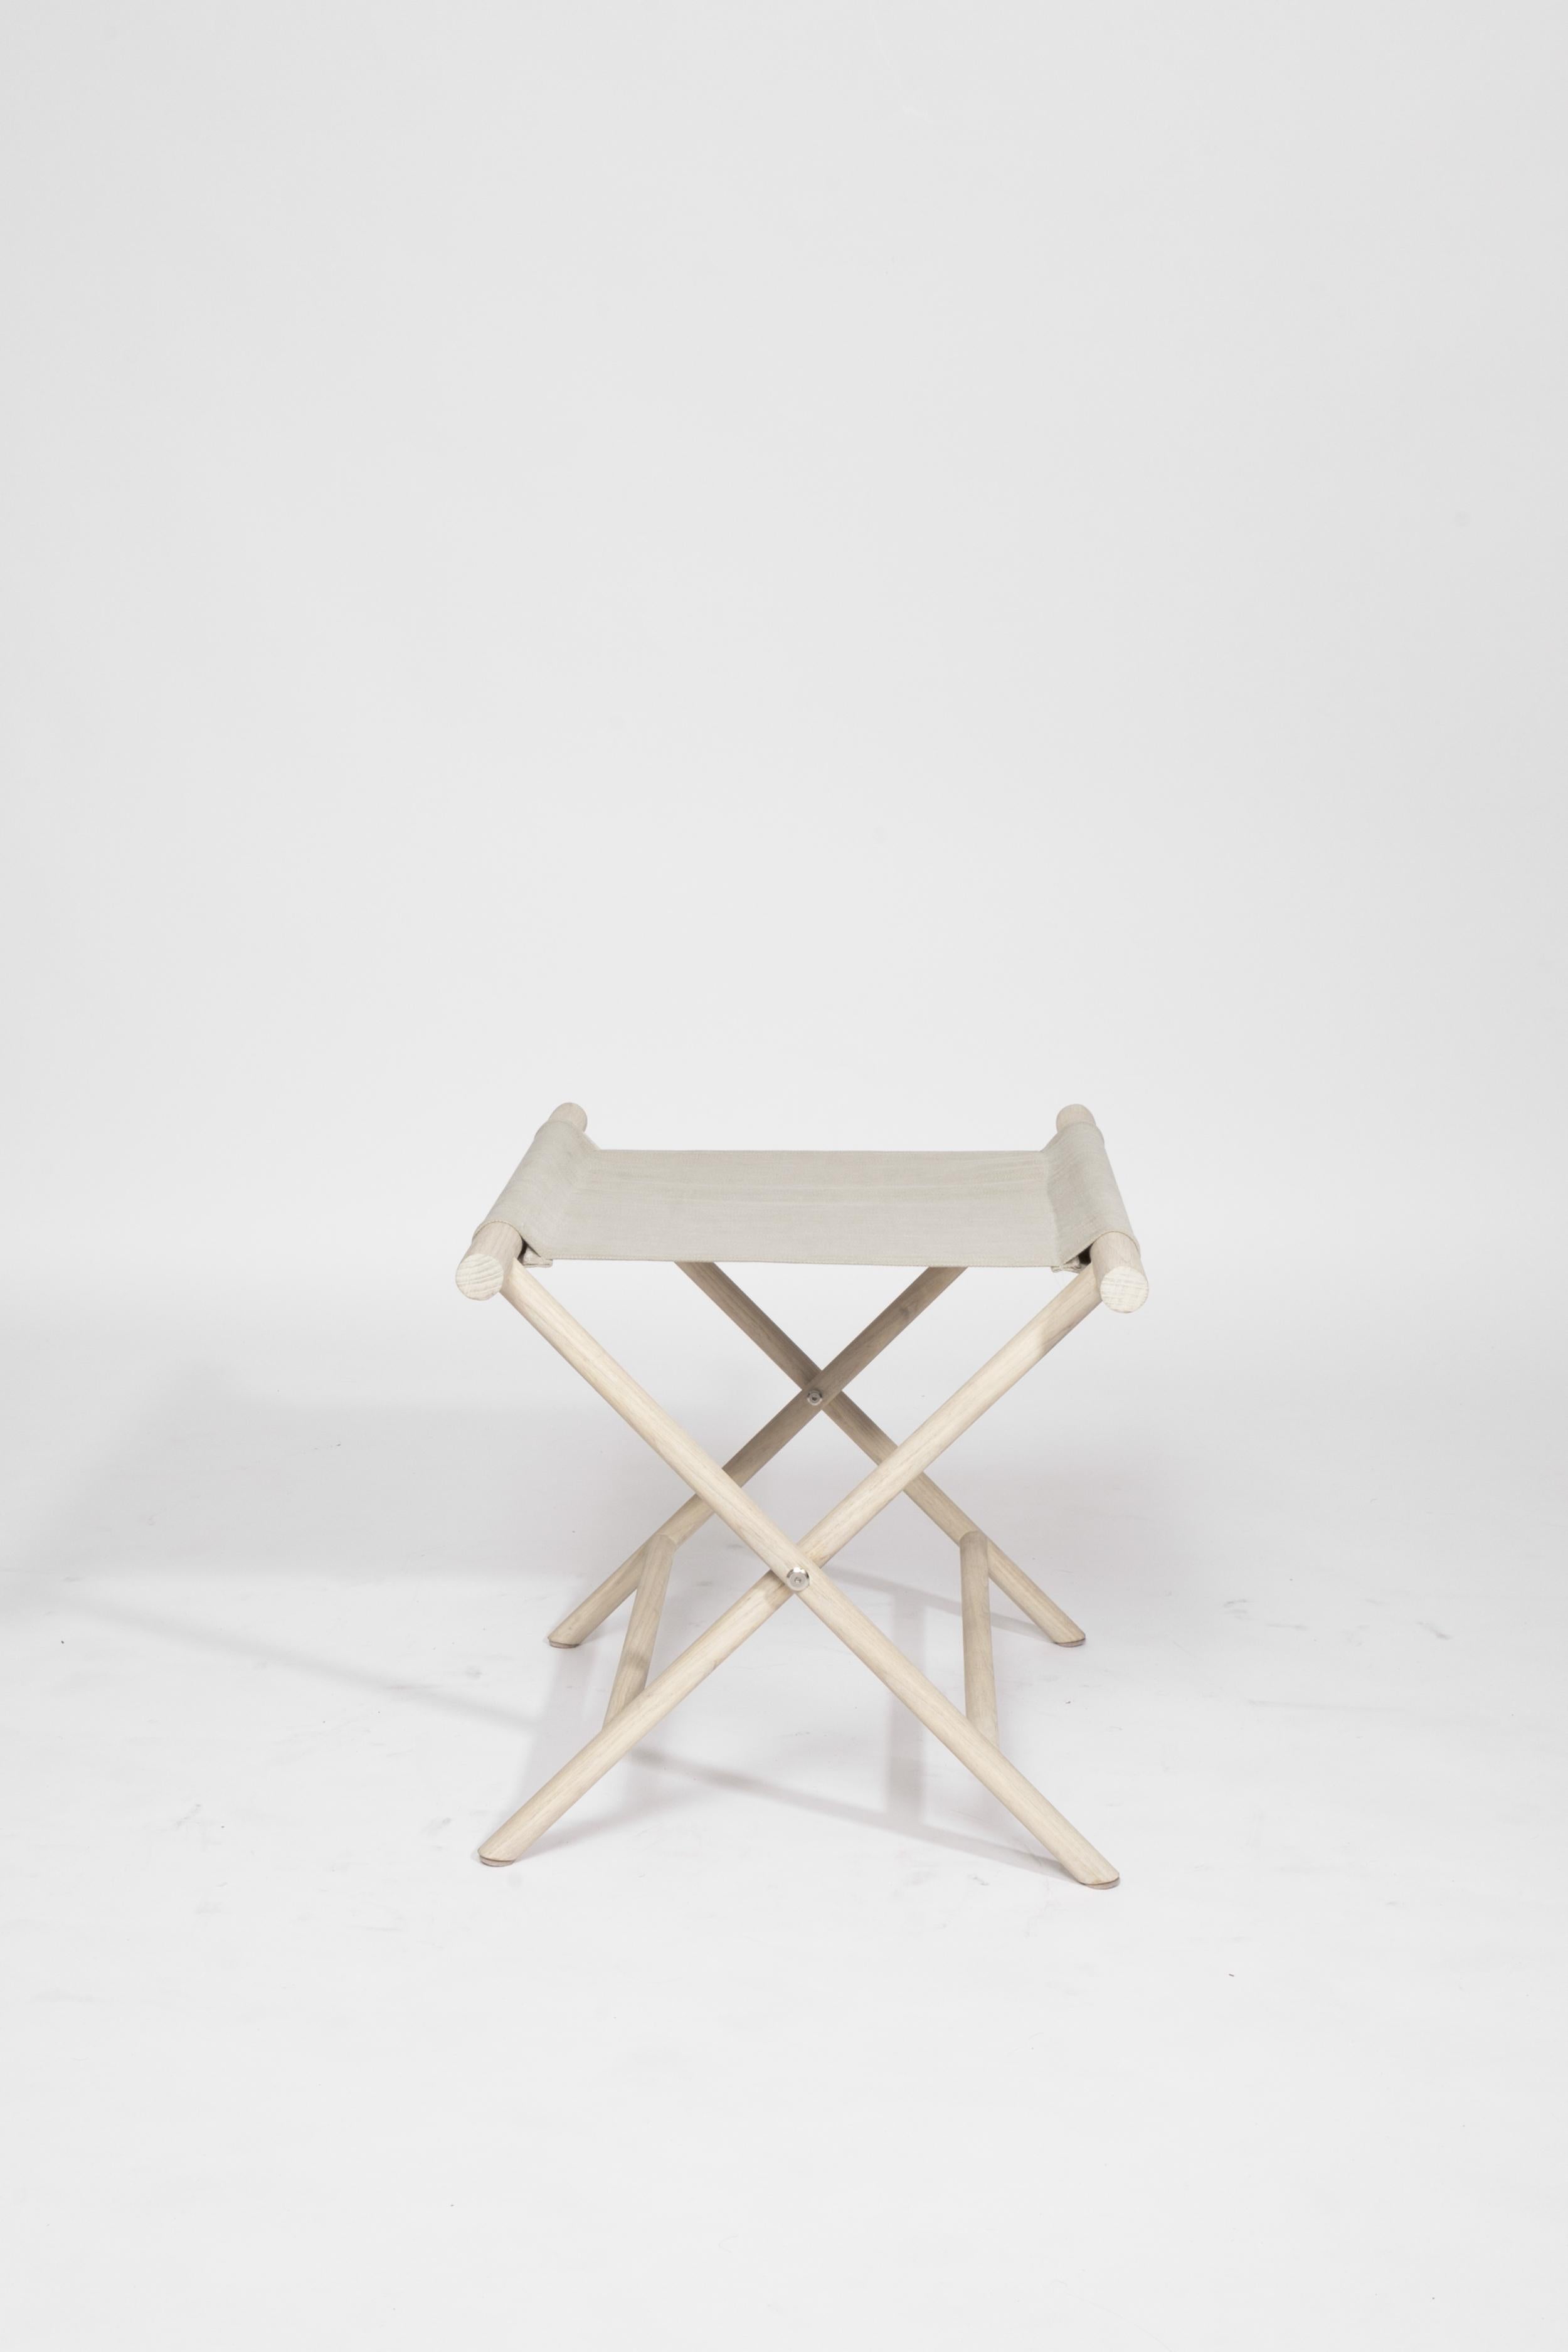 The Luggage Rack Stool is the first piece and flagship of the project of a hotel collection. The upholstery and solid wood structure provide warmth and strength to set any space and fulfill its function.   Production time: 6-8 weeks for items